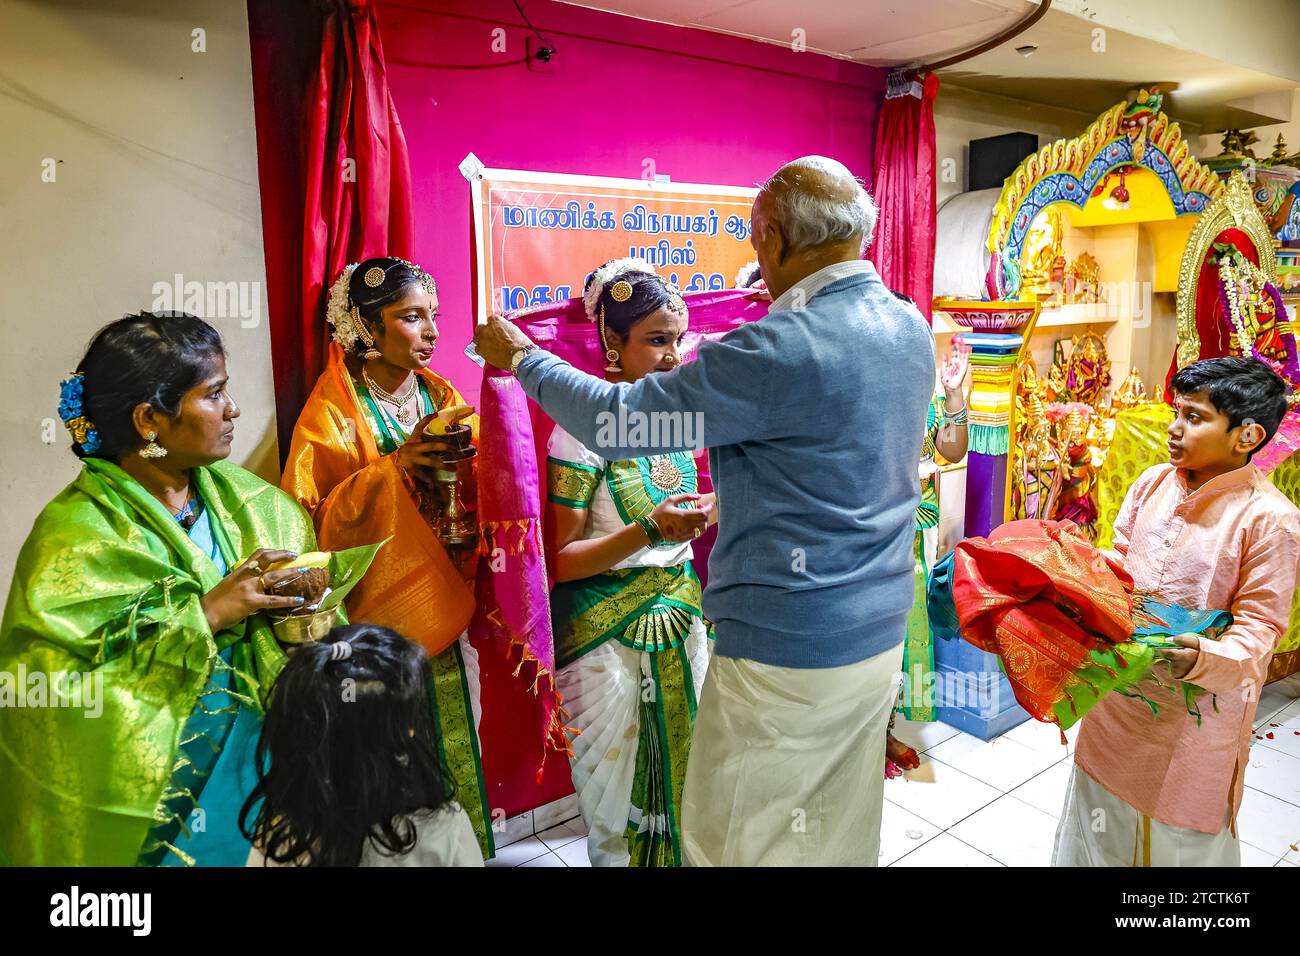 Shivaratri celebration at the Ganesh temple, Paris, France. Scarves offered to dancers Stock Photo